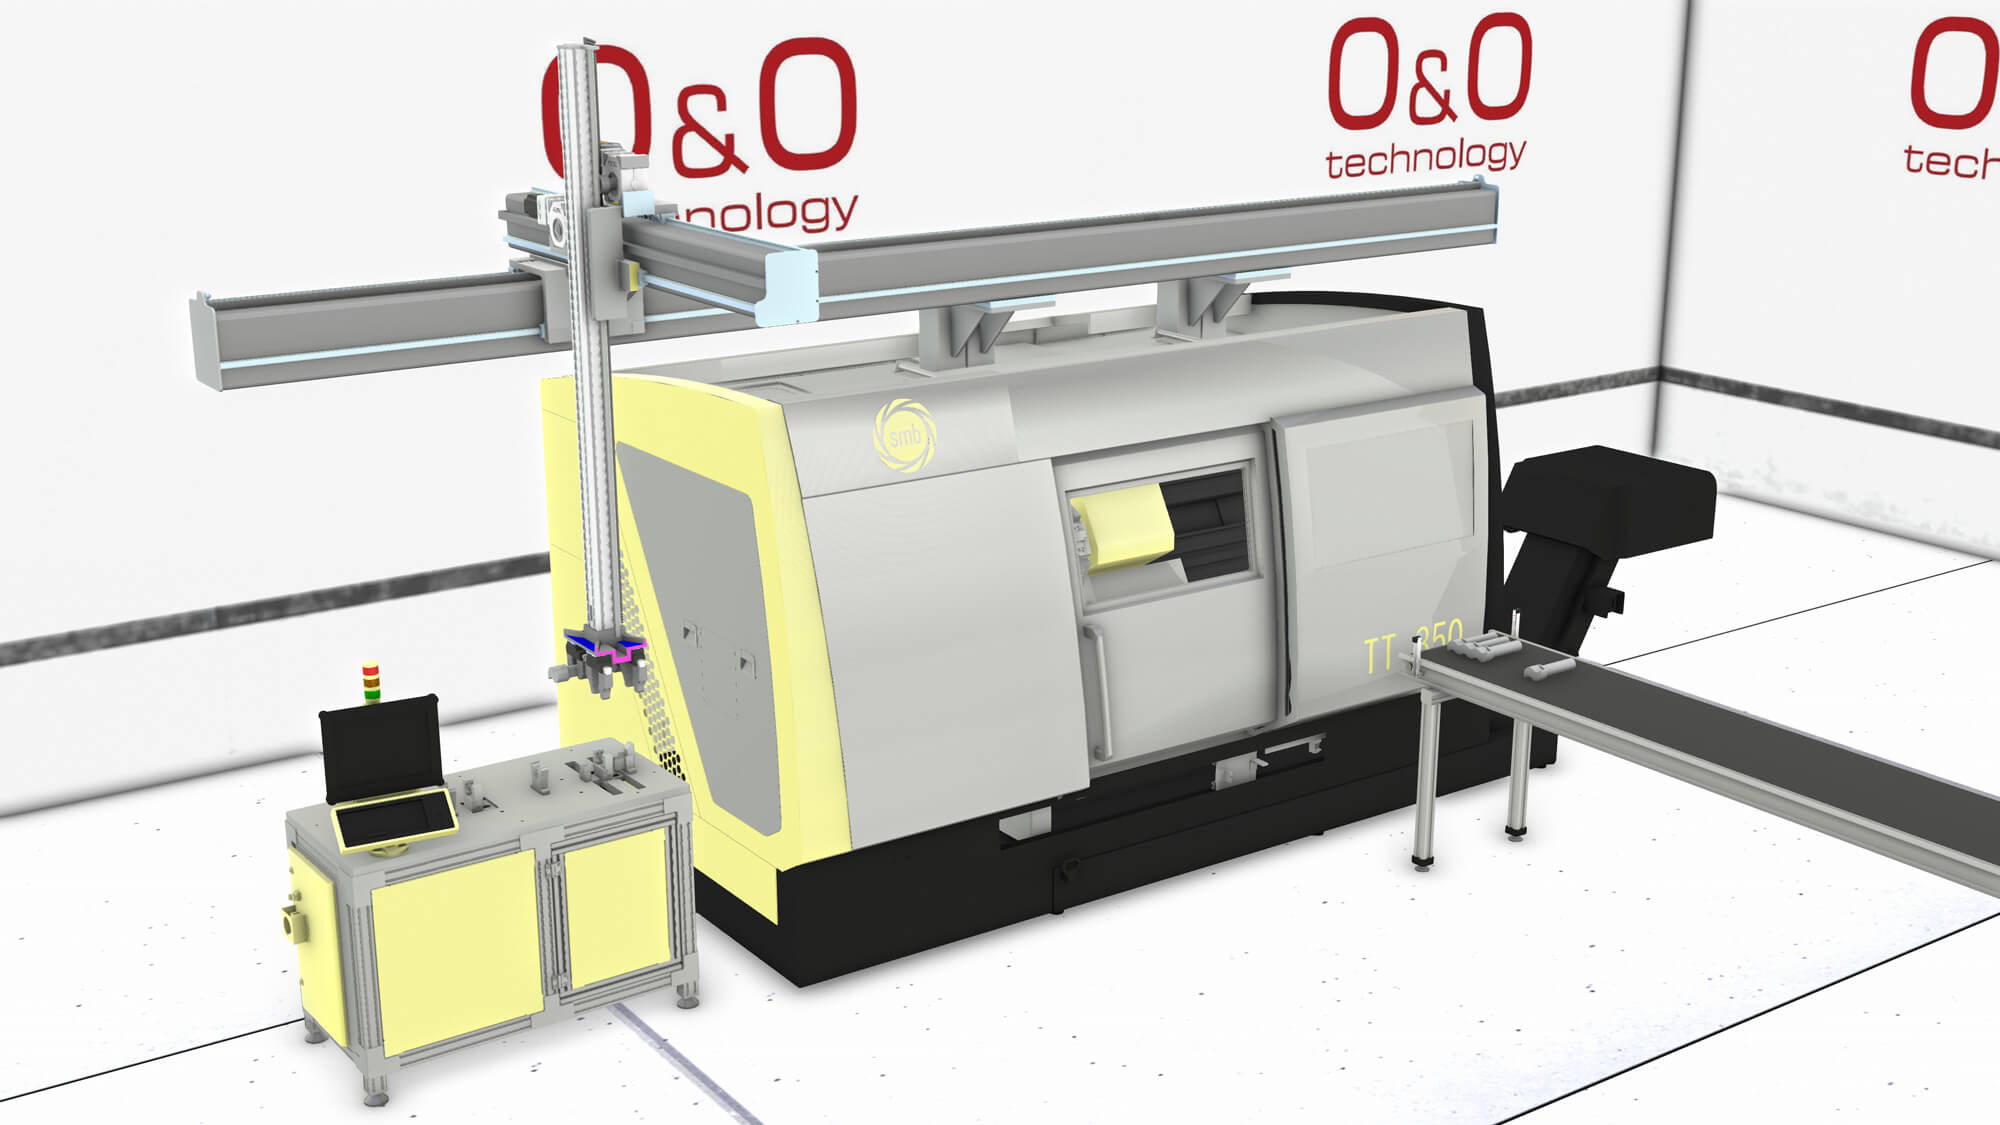 Production line simulation with a conveyor belt